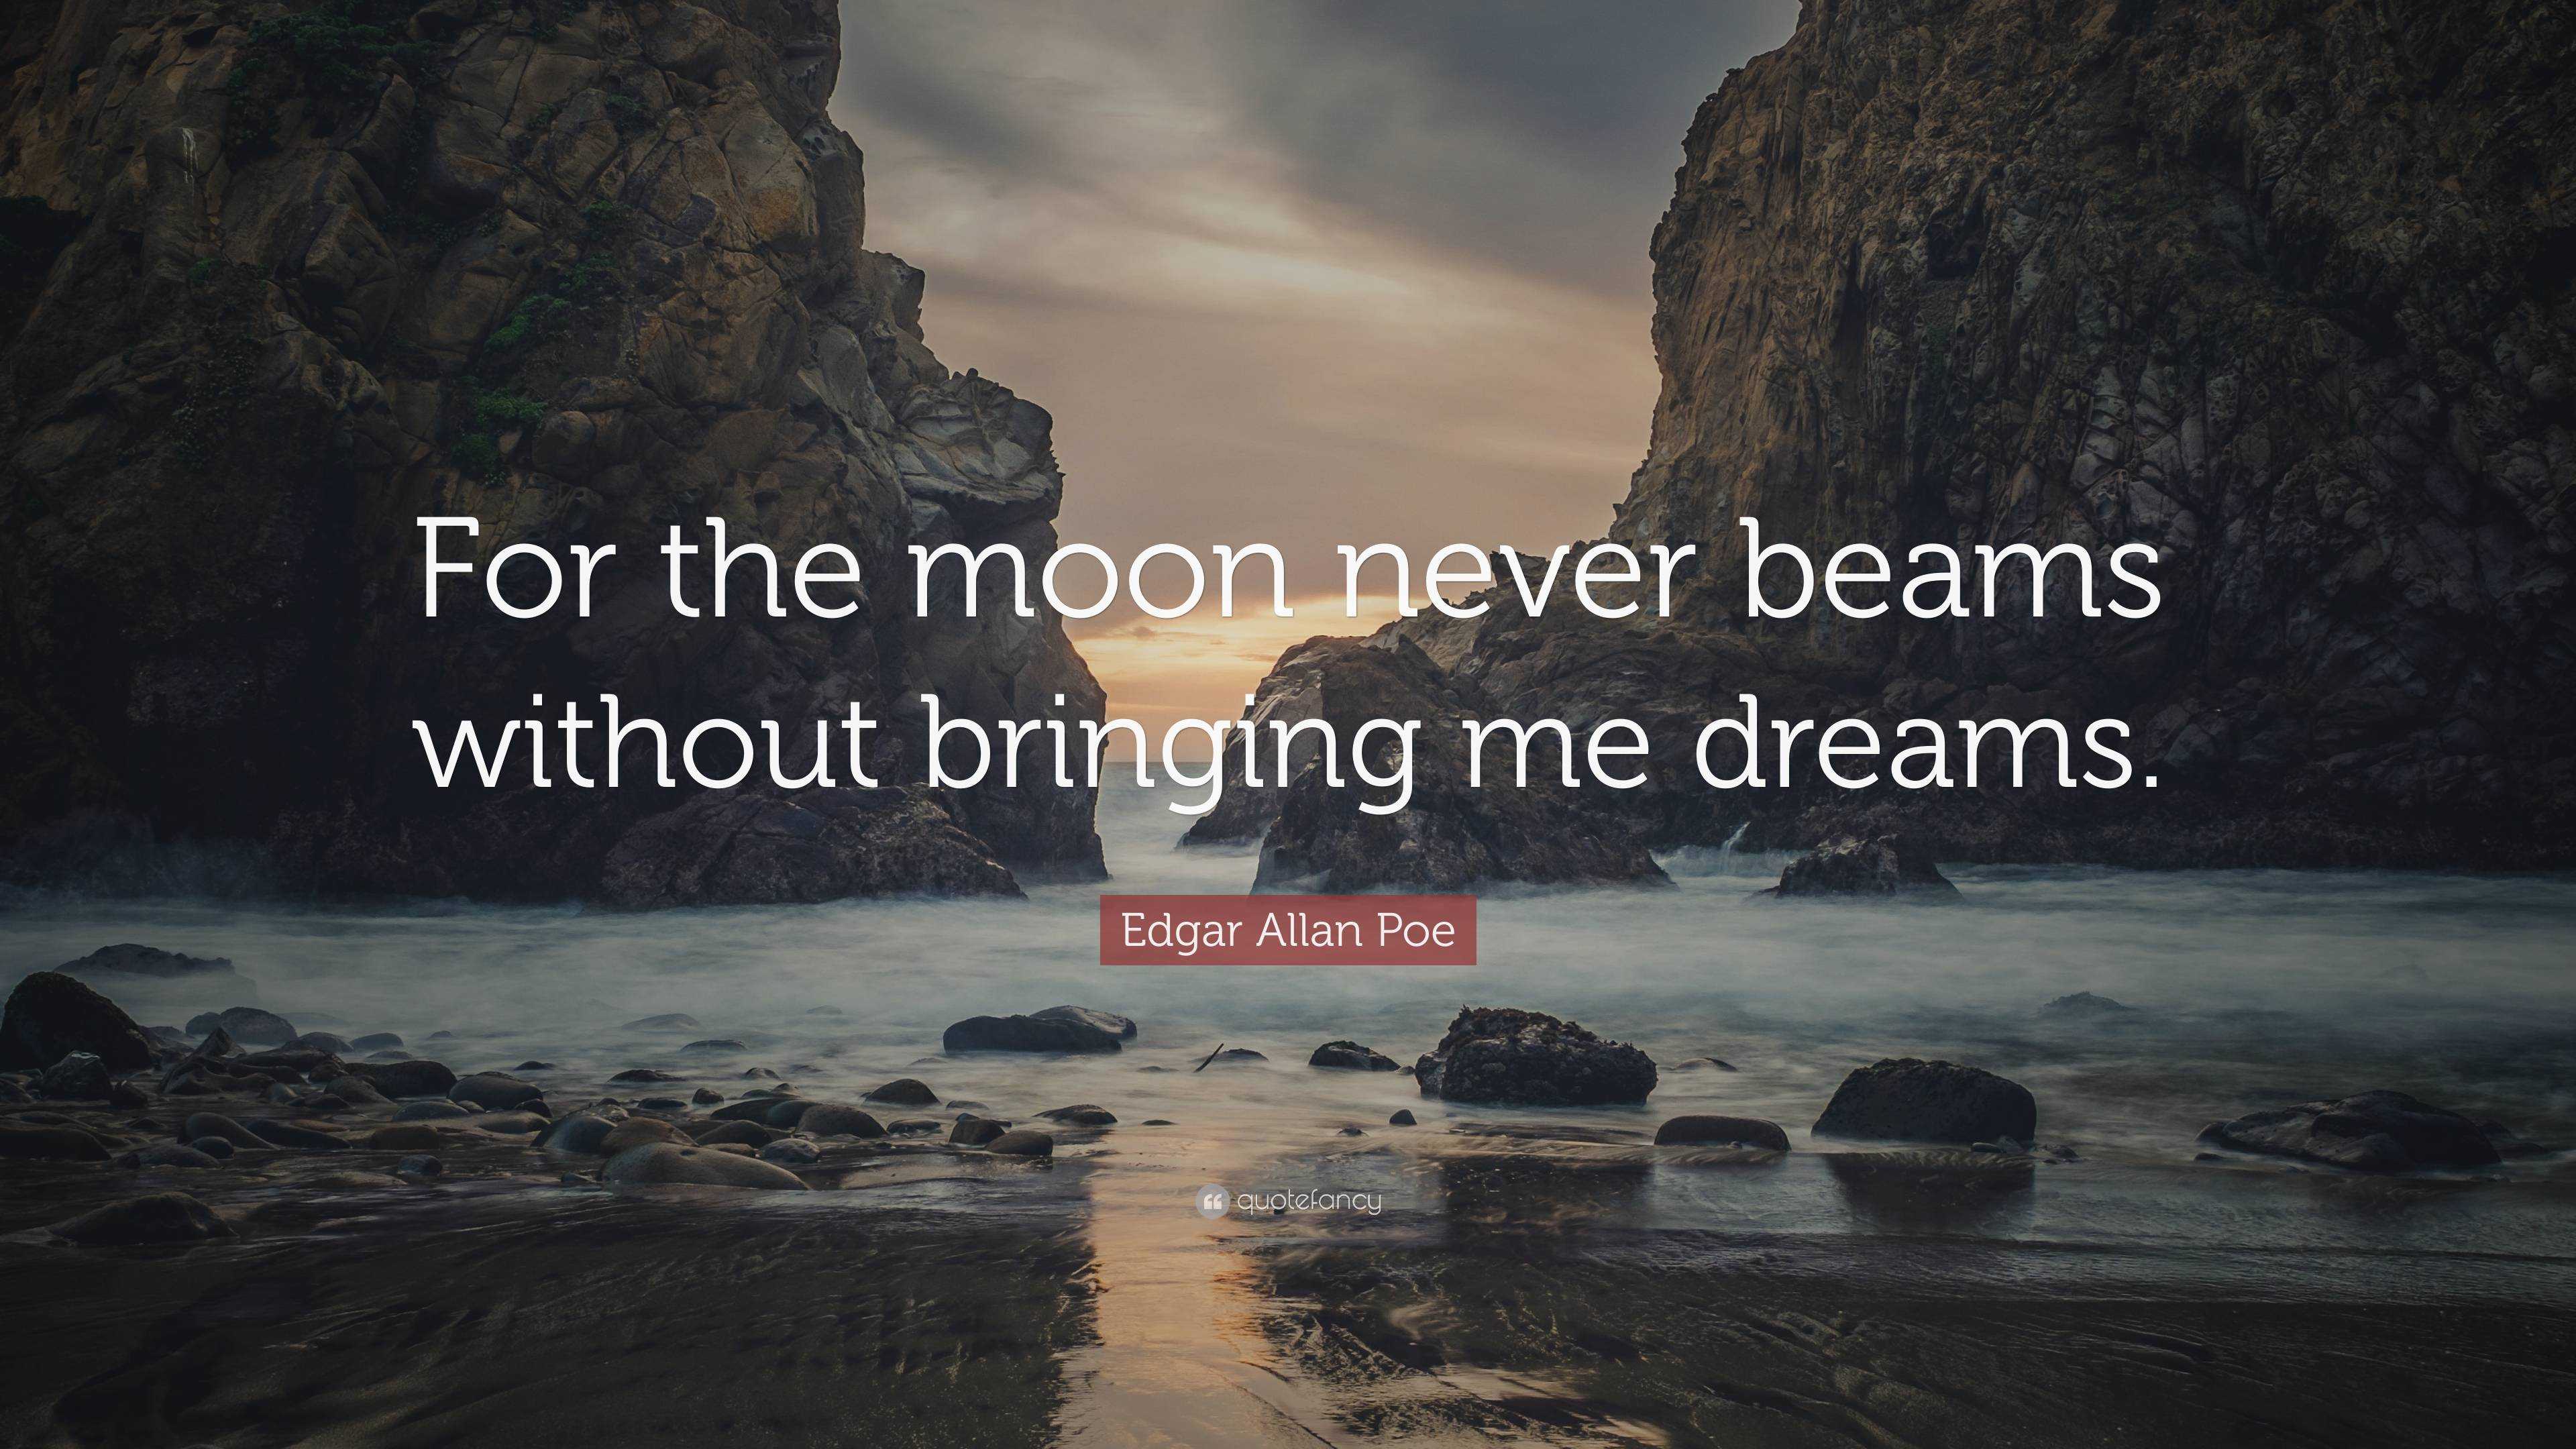 Edgar Allan Poe Quote: “For the moon never beams without bringing me ...